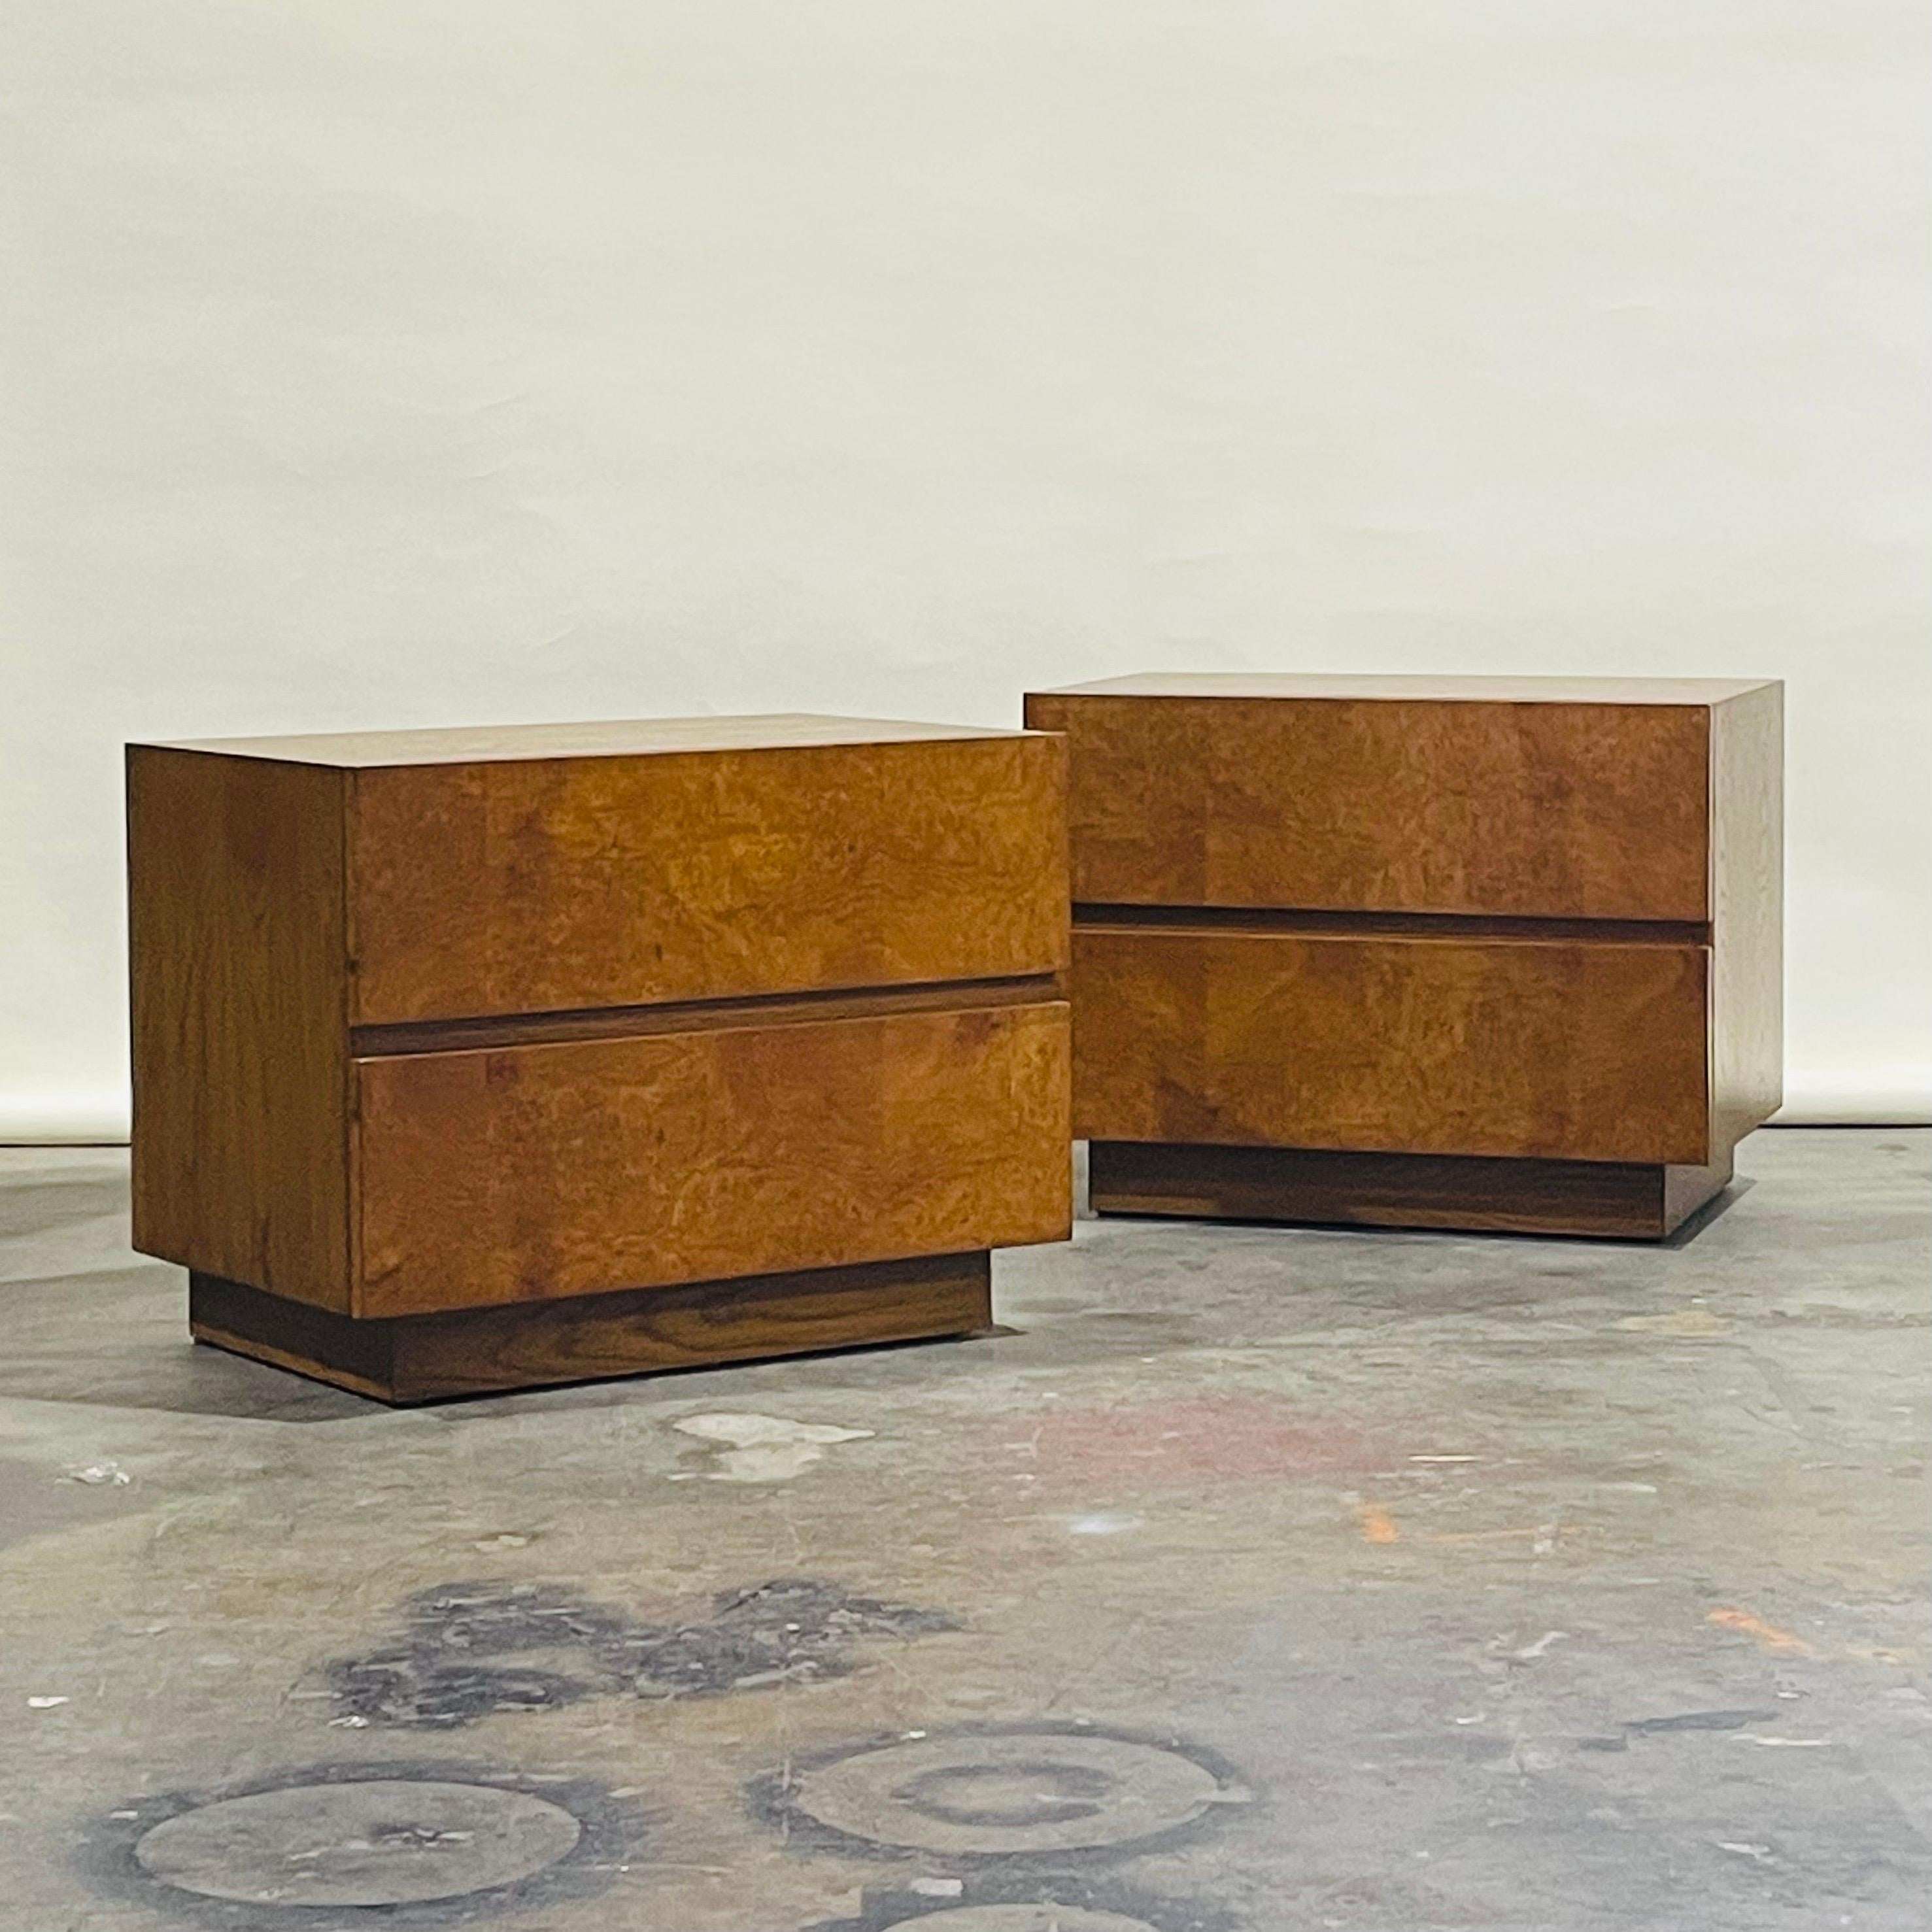 Introducing our 'Amboine' burl wood night stands, the epitome of simplicity and sophistication.

Crafted with meticulous attention to detail in our Los Angeles workshop, these night stands boast a clean and minimalistic design that exudes